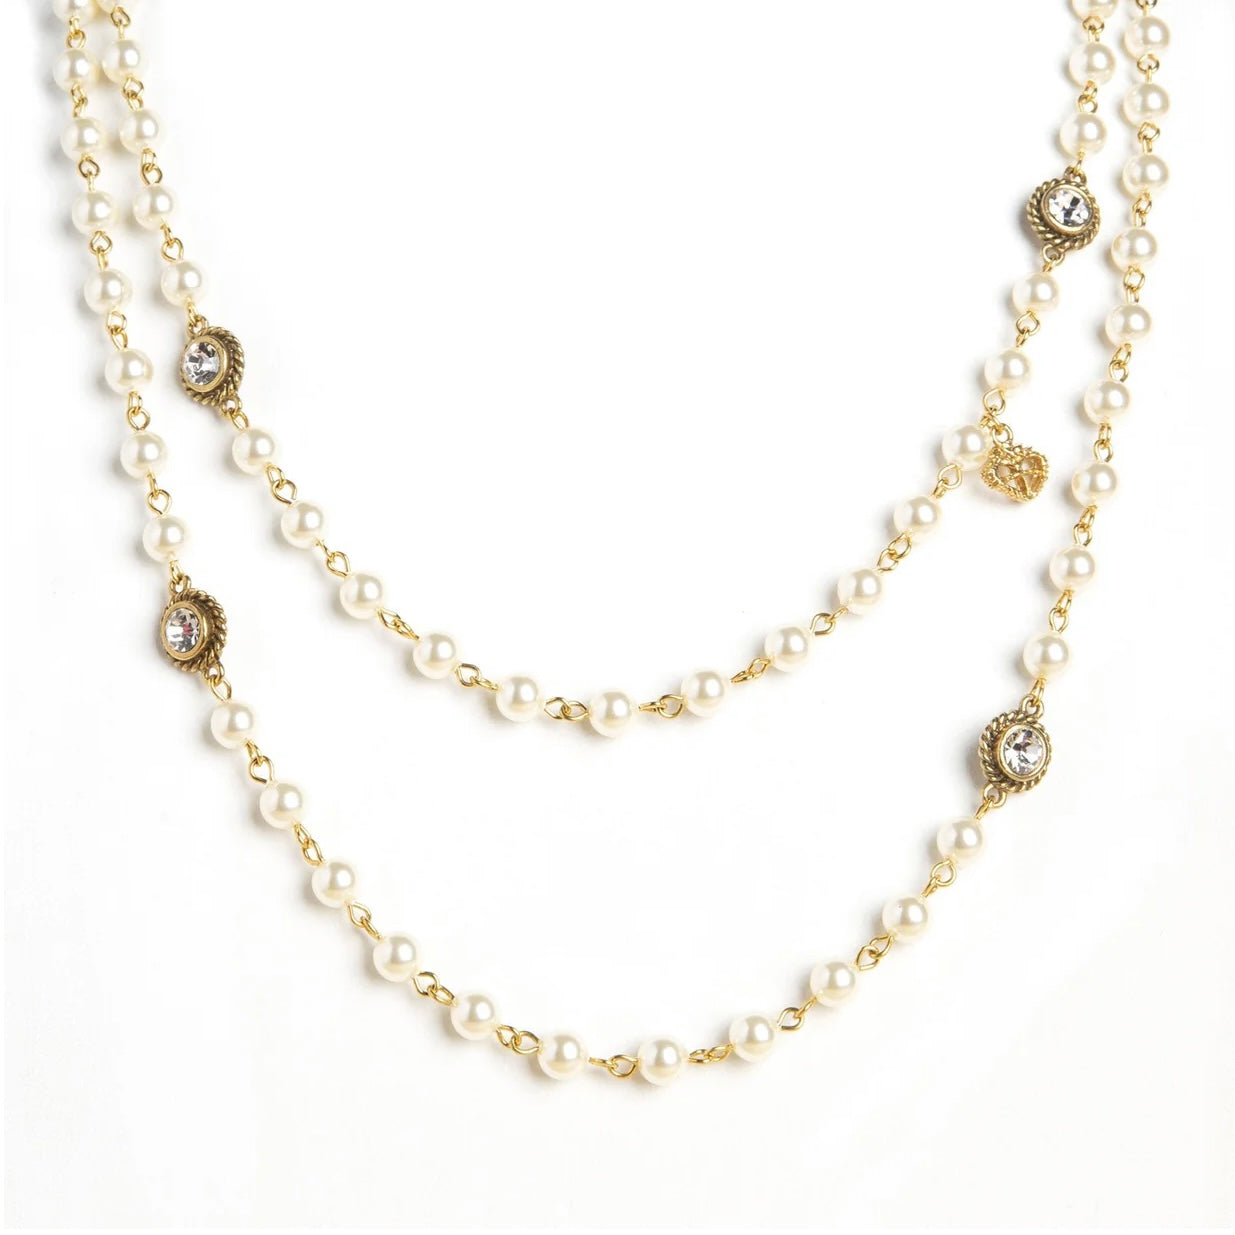 Wrap- 6mm Gold Cream Pearl Necklace